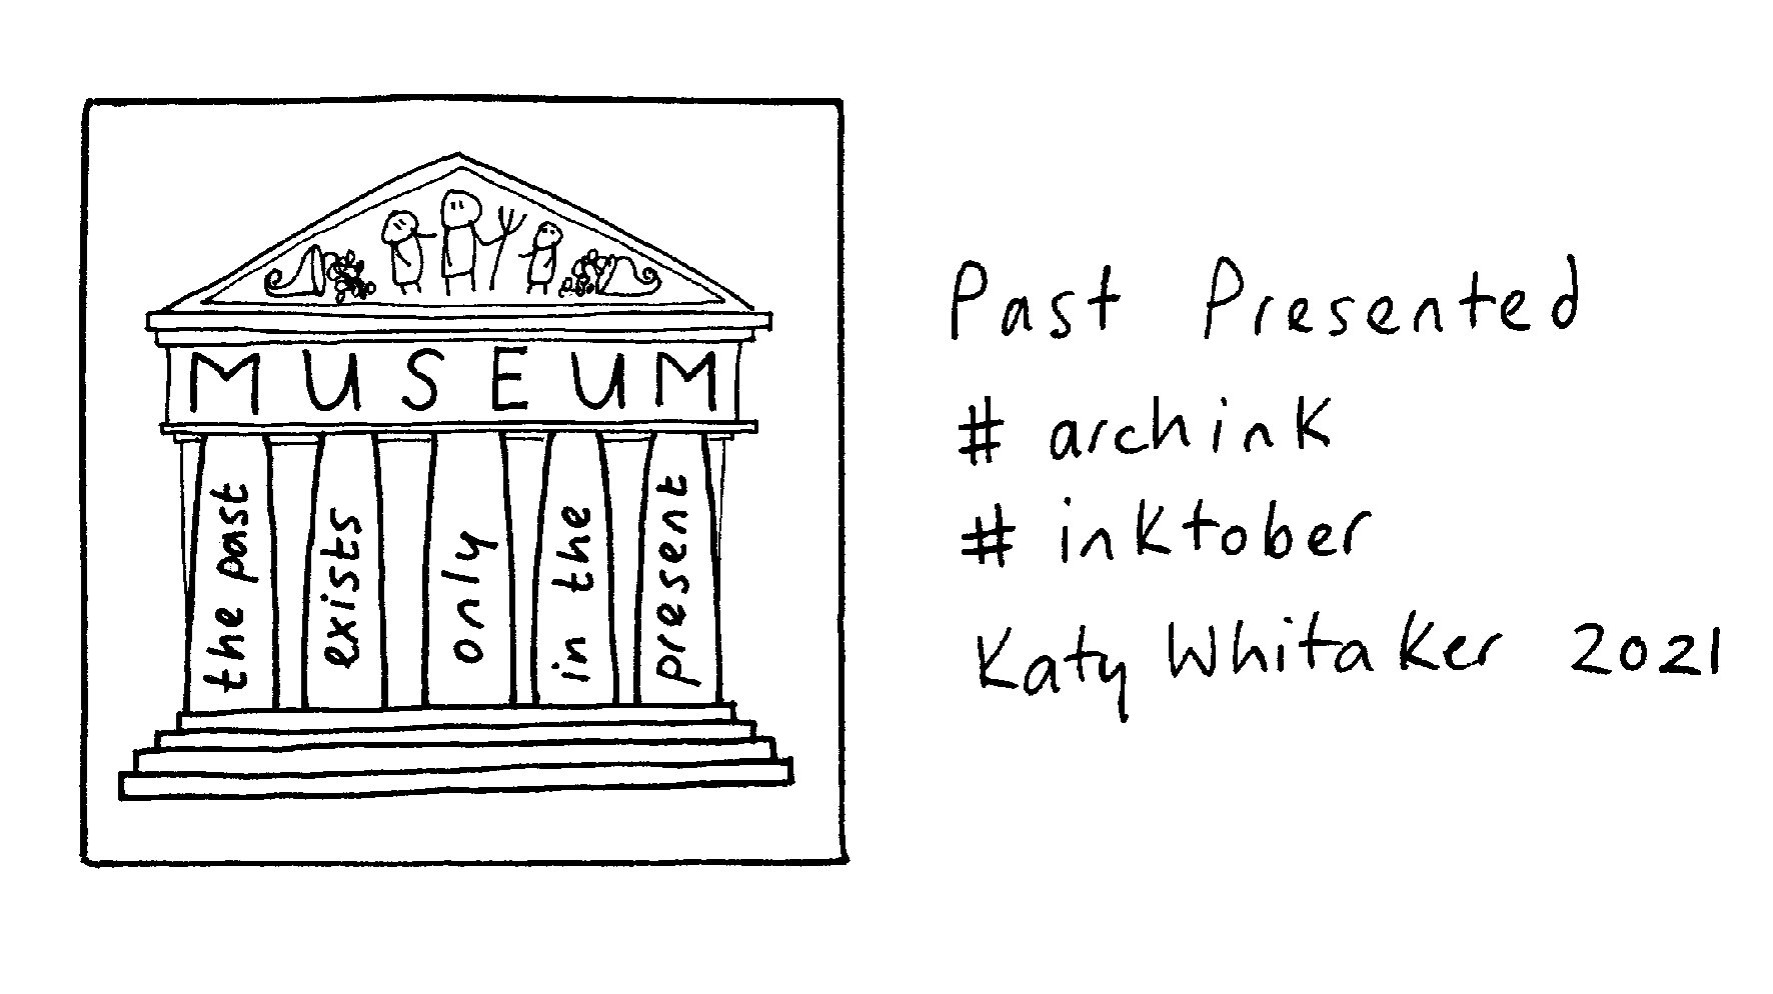 A drawing of a building with 4 columns and 4 steps with text 